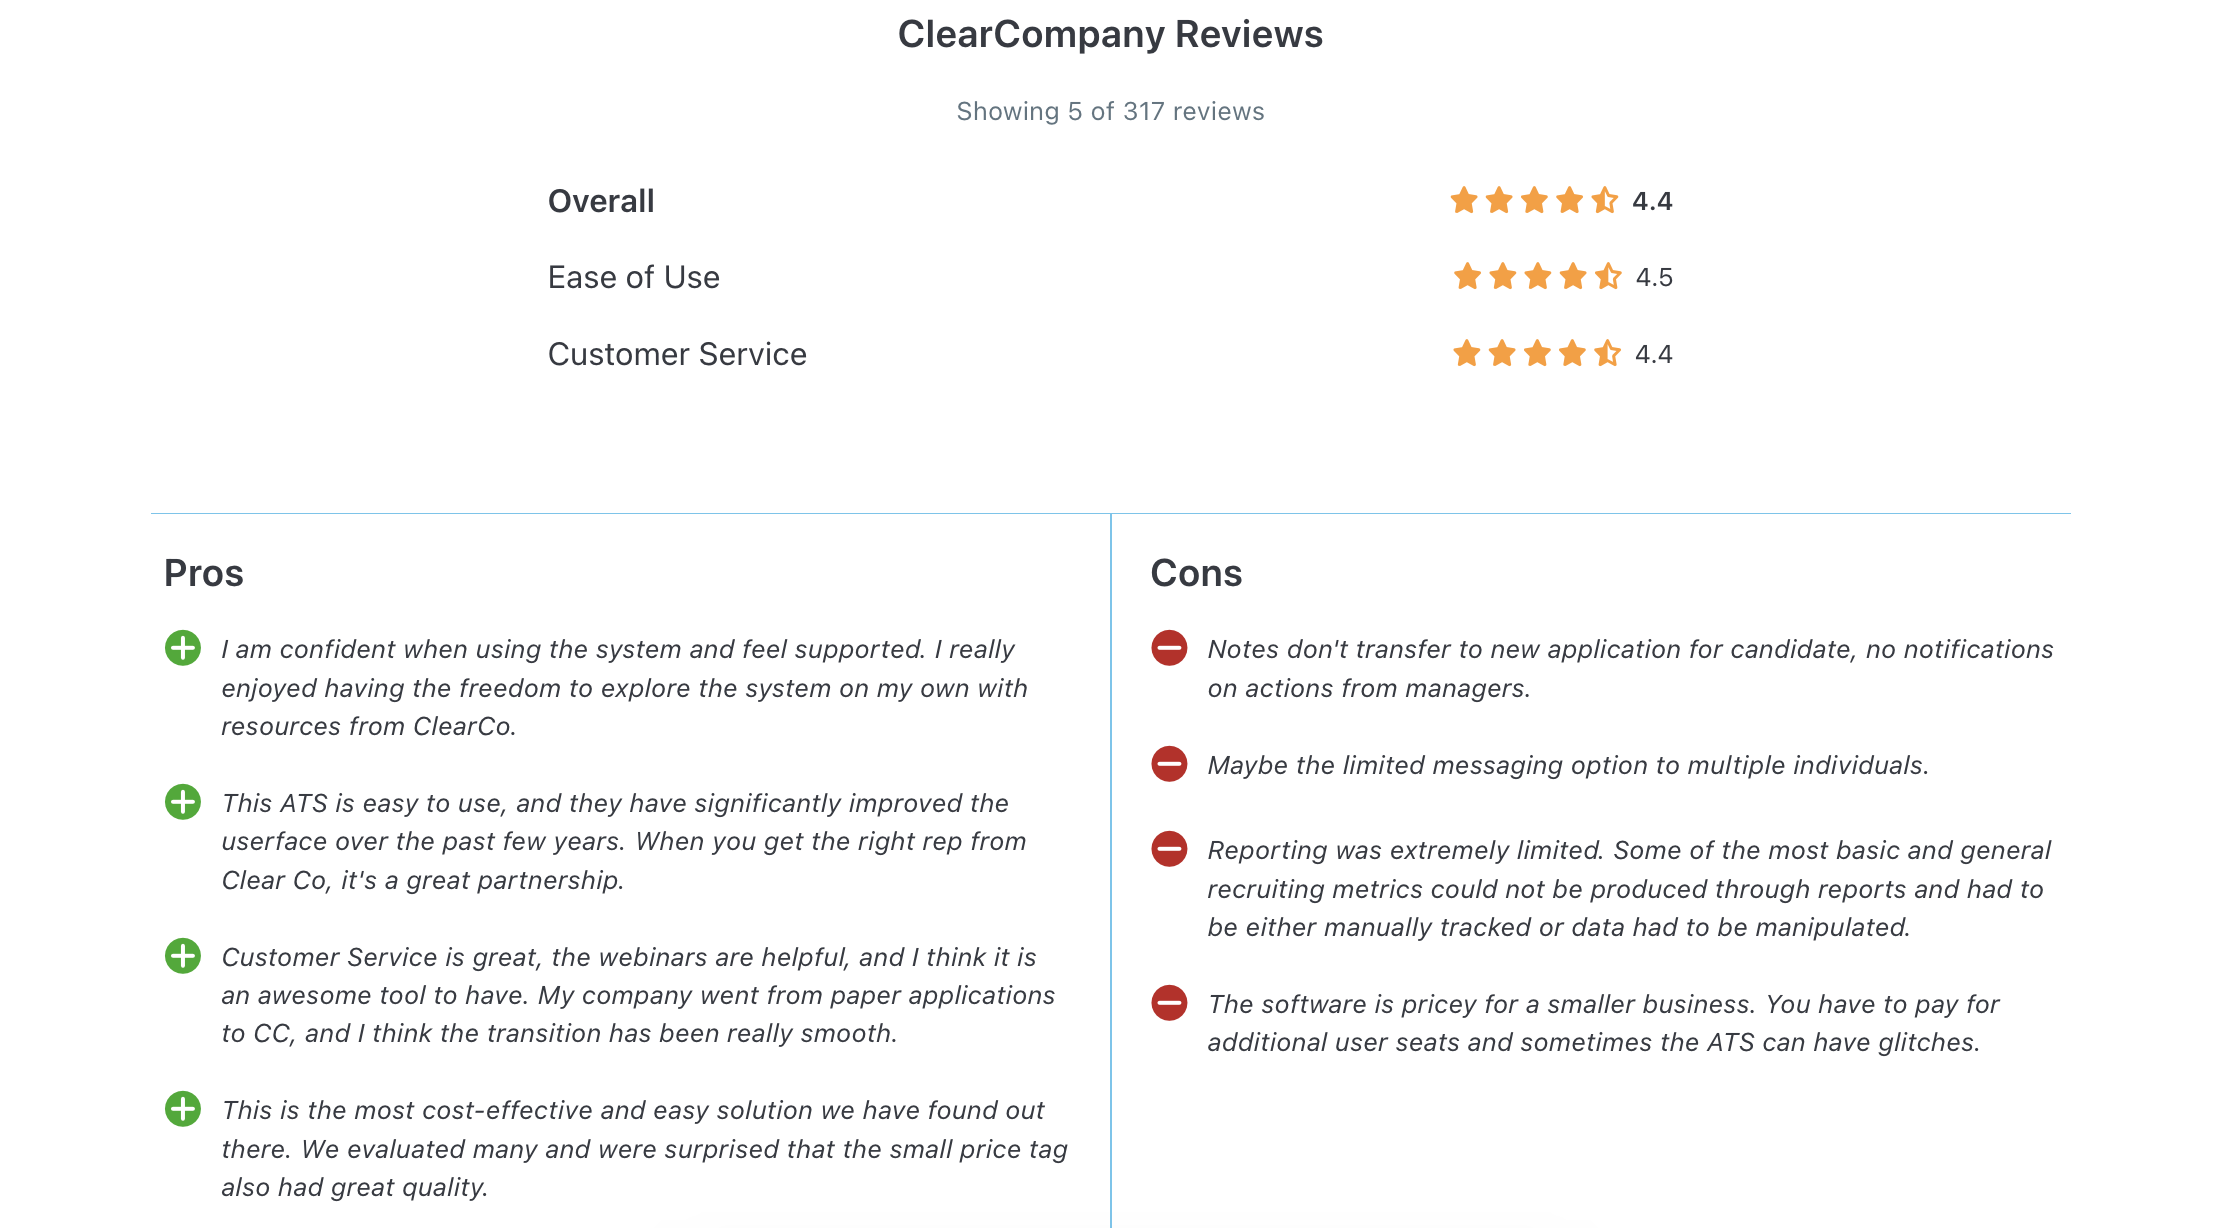 clearcompany reviews